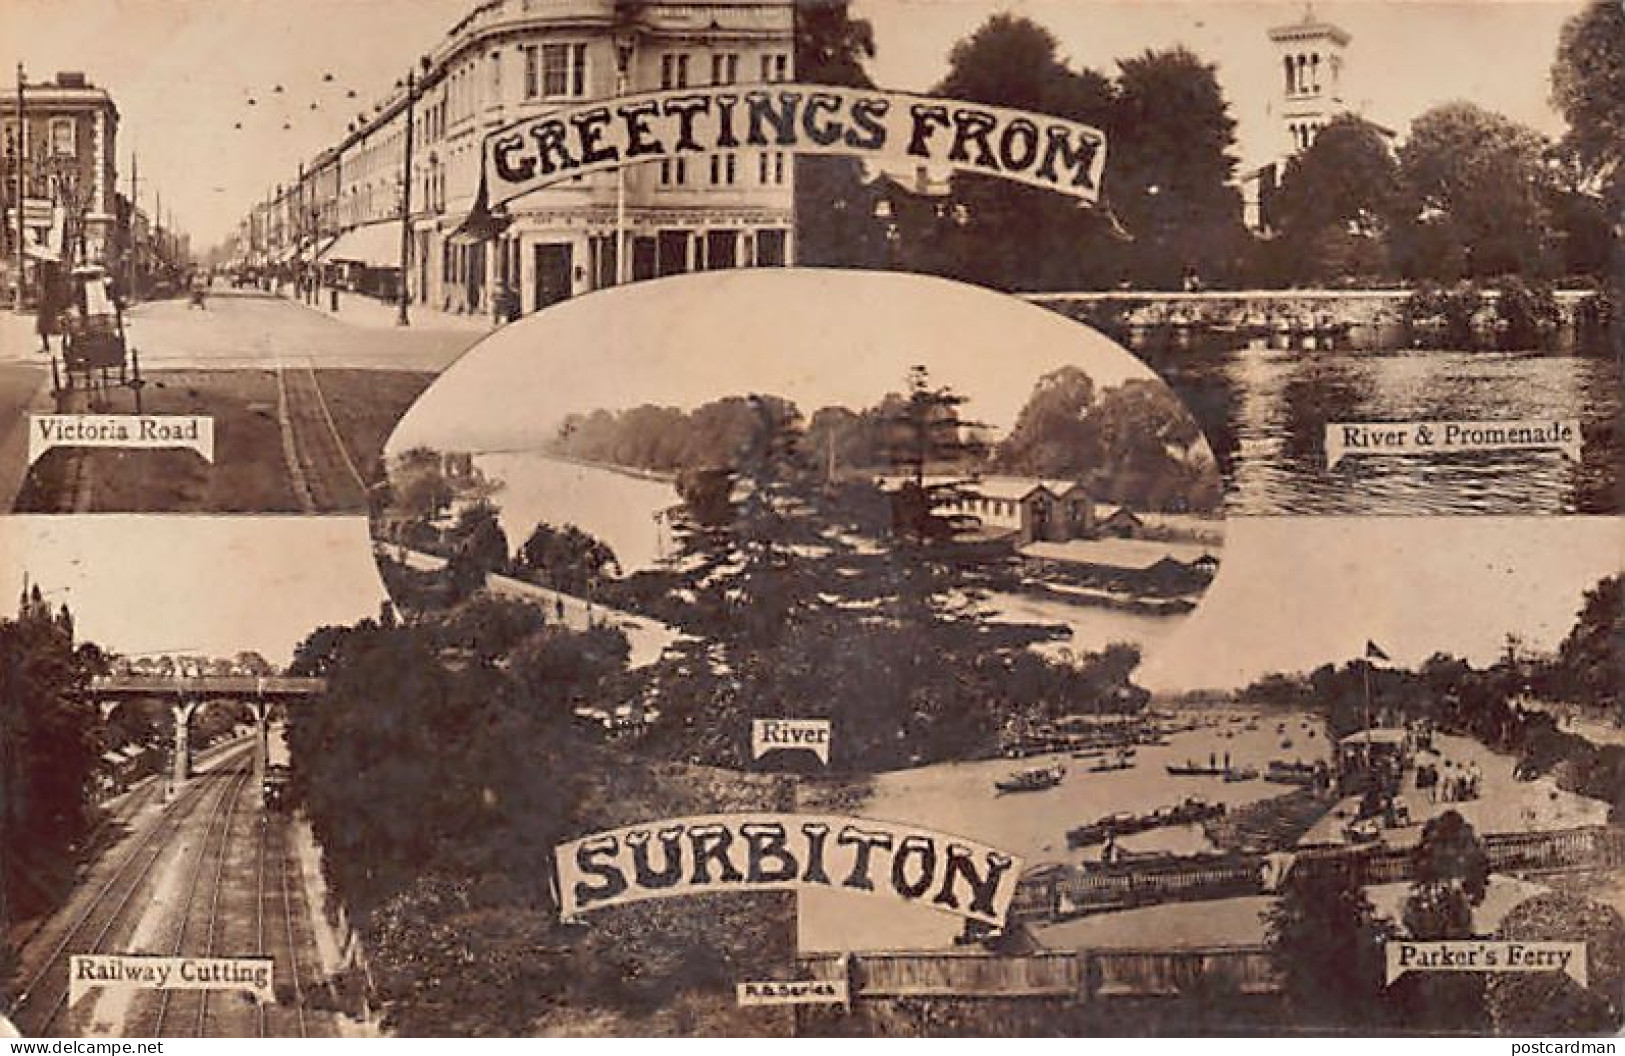 England - SURBITON (Greater London) Greetings From - Victoria Rd. - Railway Cutting - River - Parker's Ferry - River & P - London Suburbs